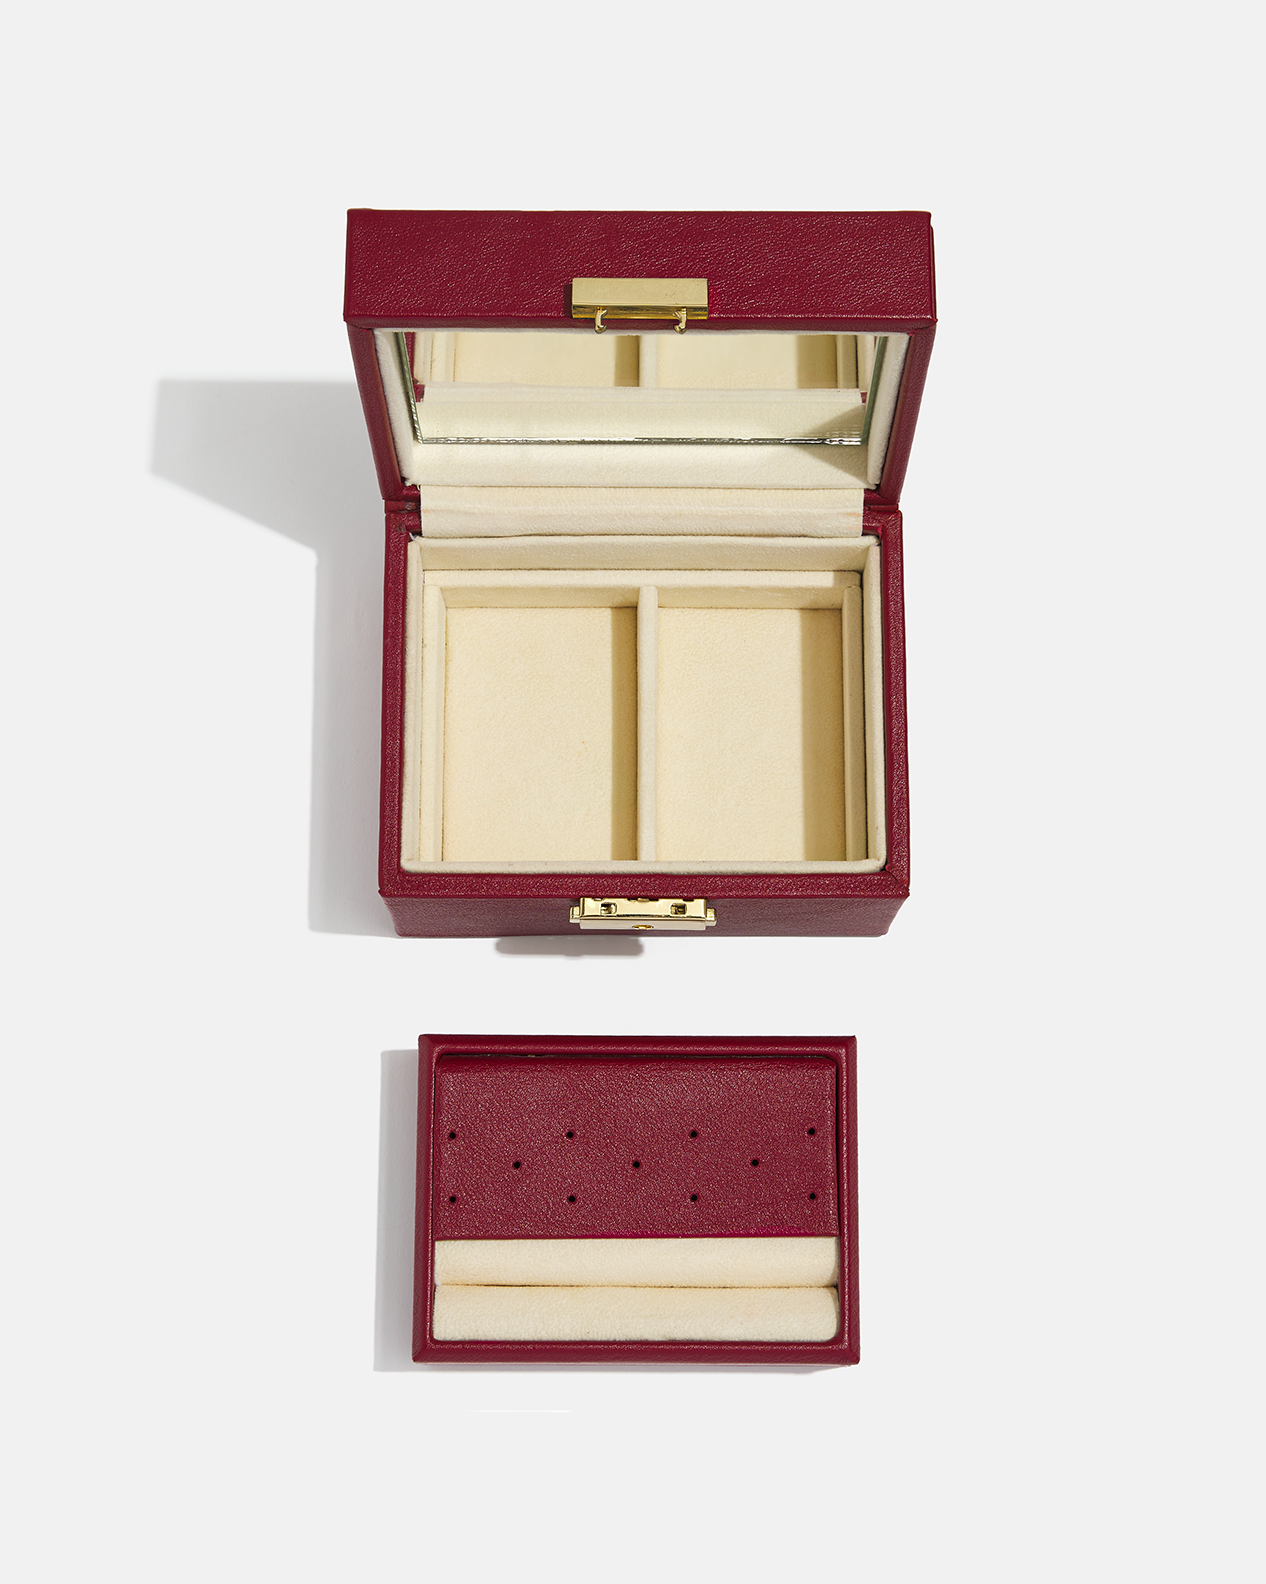 Handmade Leather Jewelry Box in Carmine red